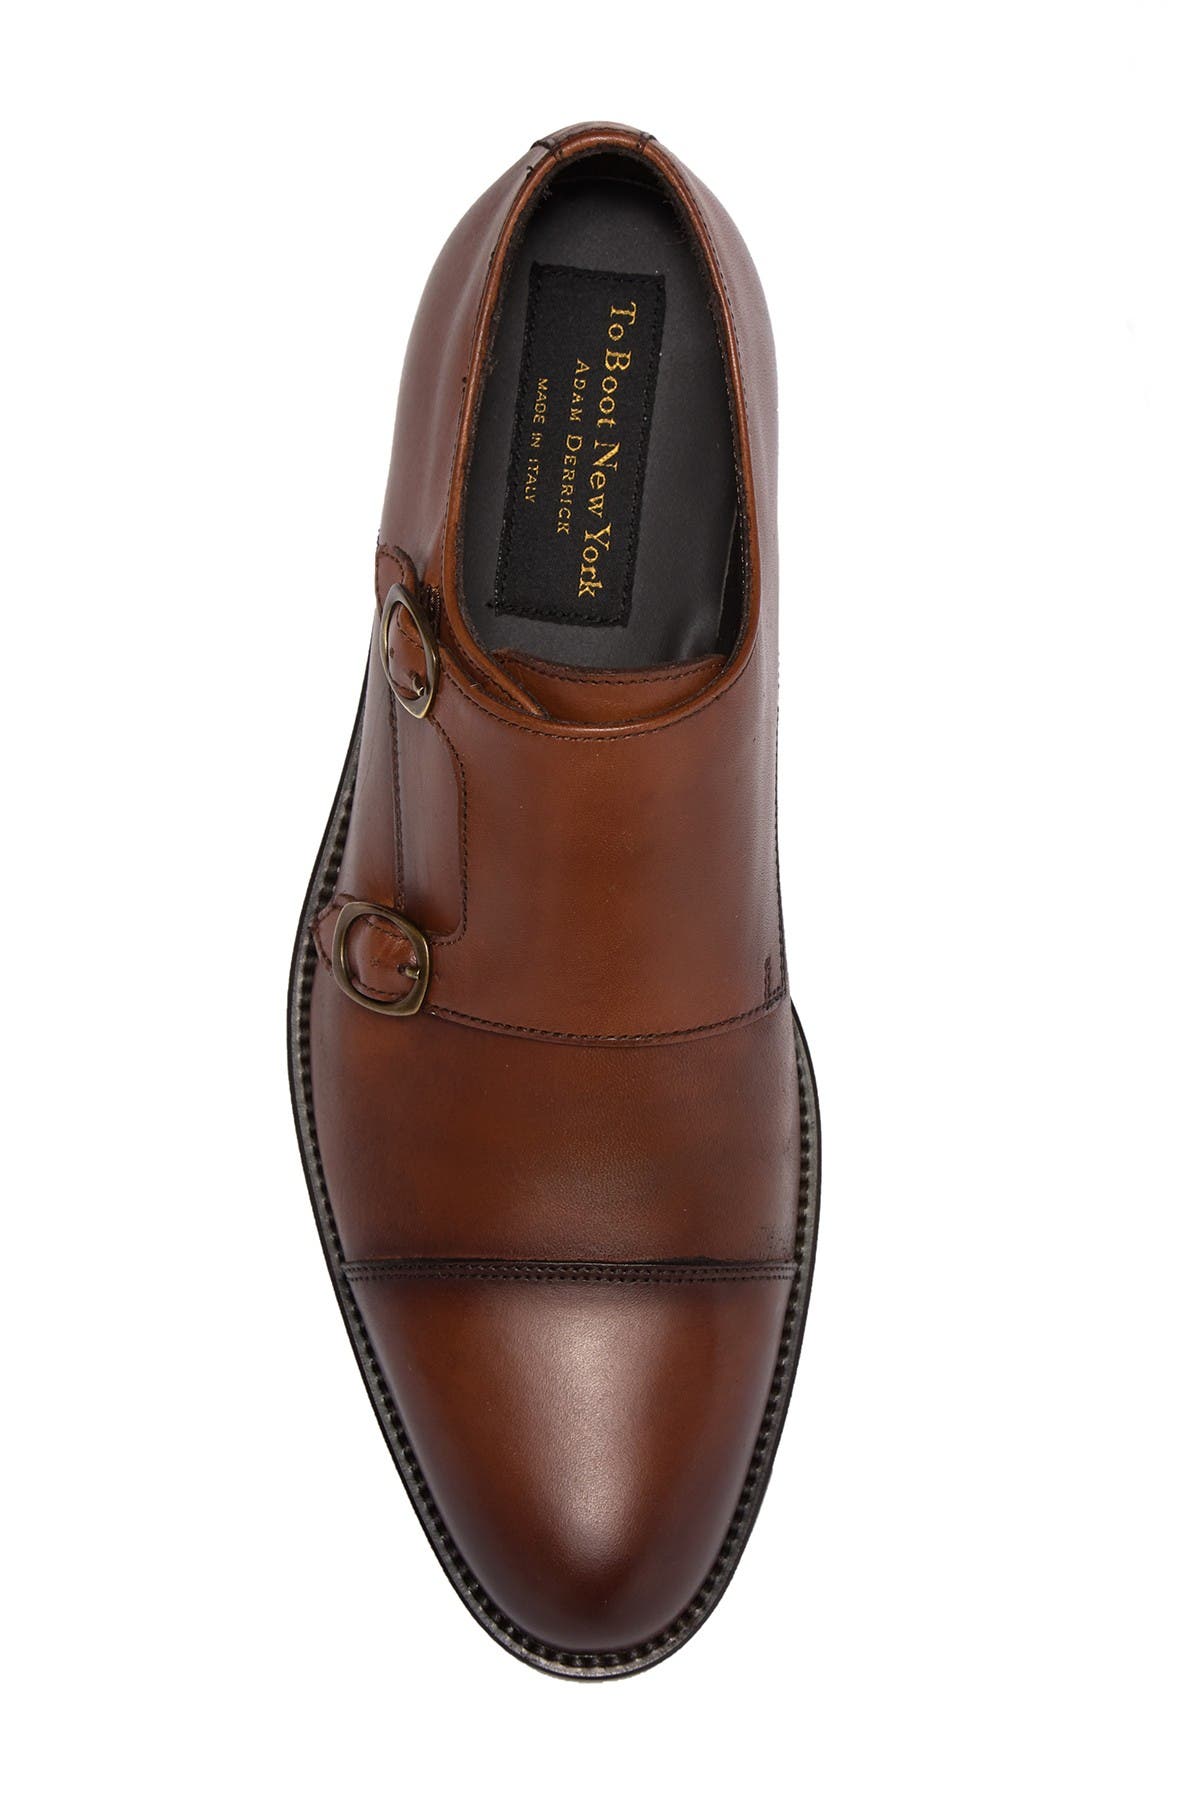 too boot new york monk strap